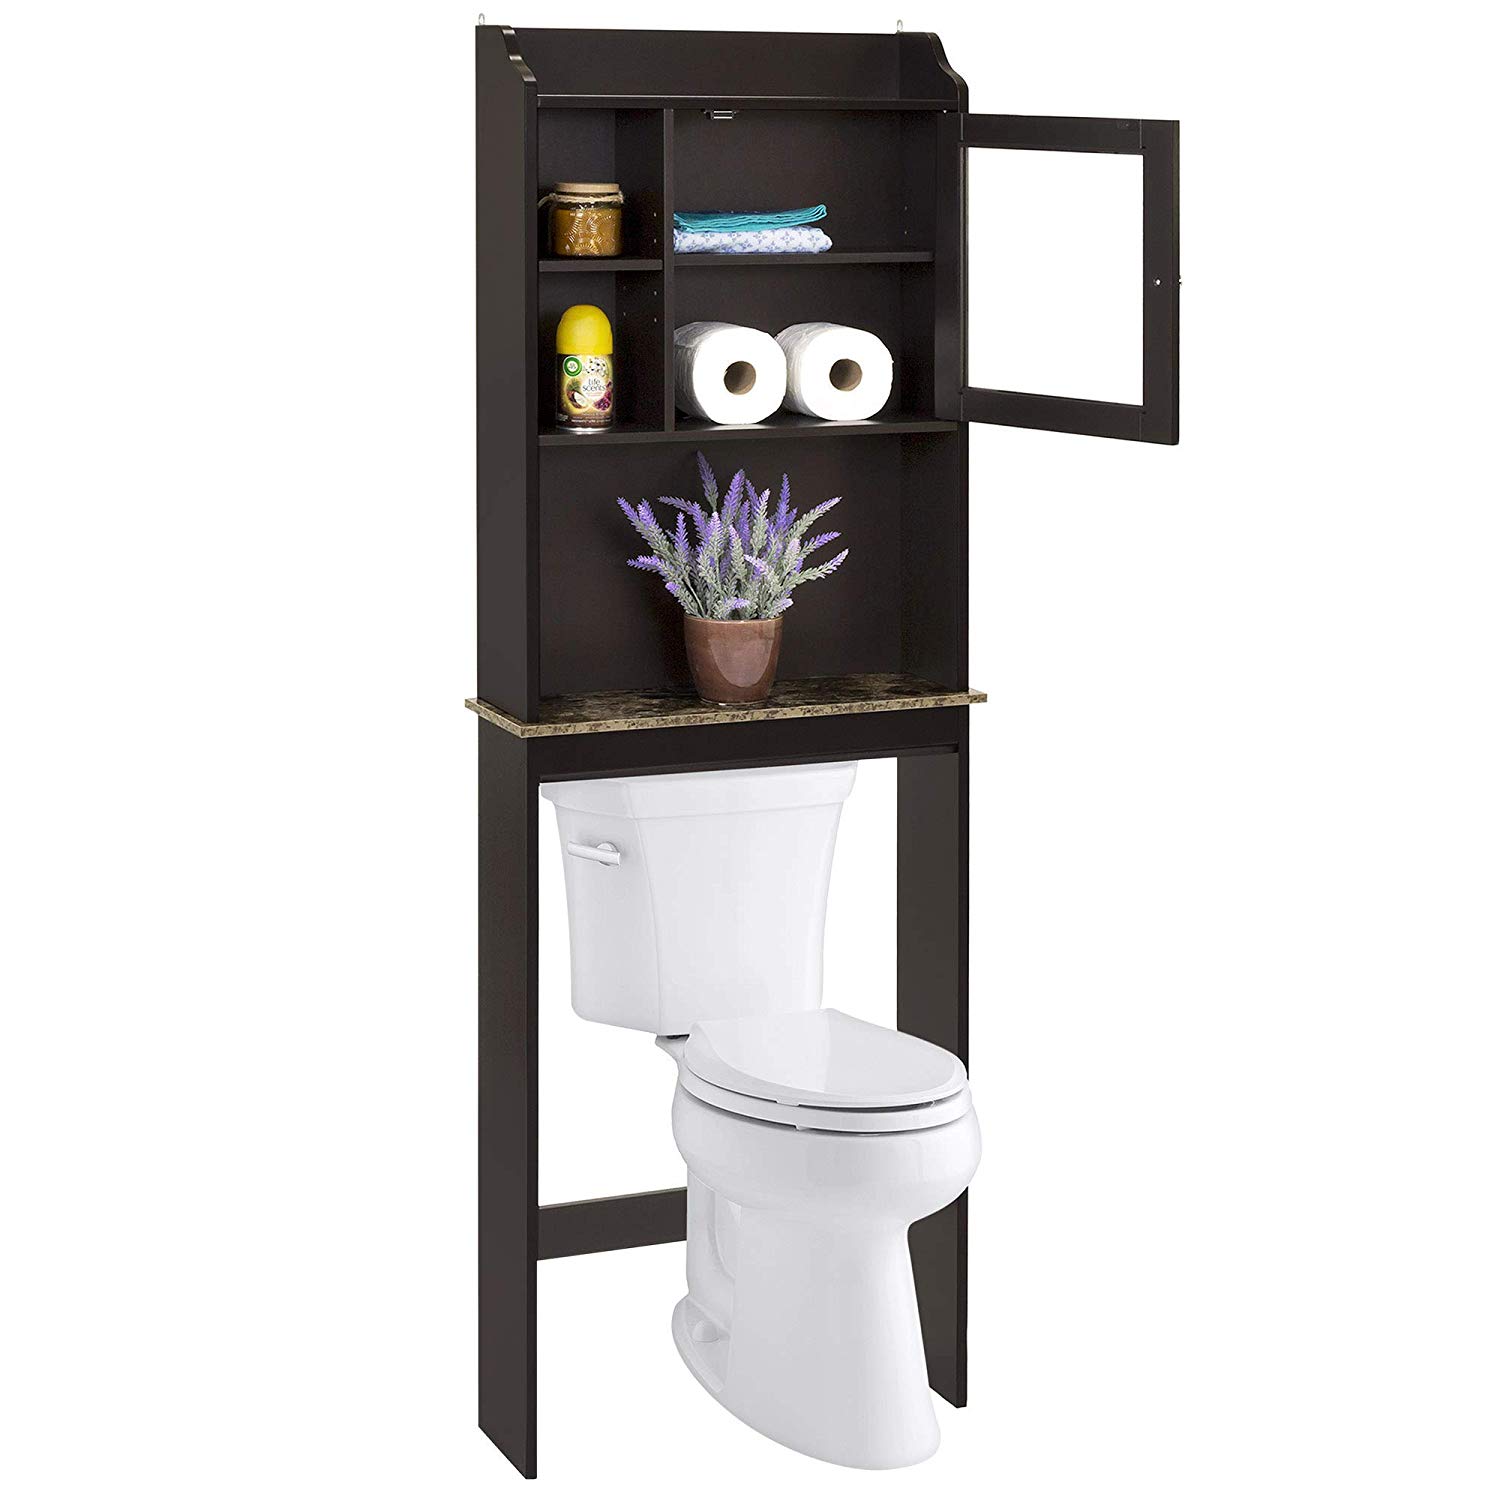 Modern Over The Toilet Space Saver Organization Wood Storage Cabinet for Home, Bathroom - Espresso-Boyel Living